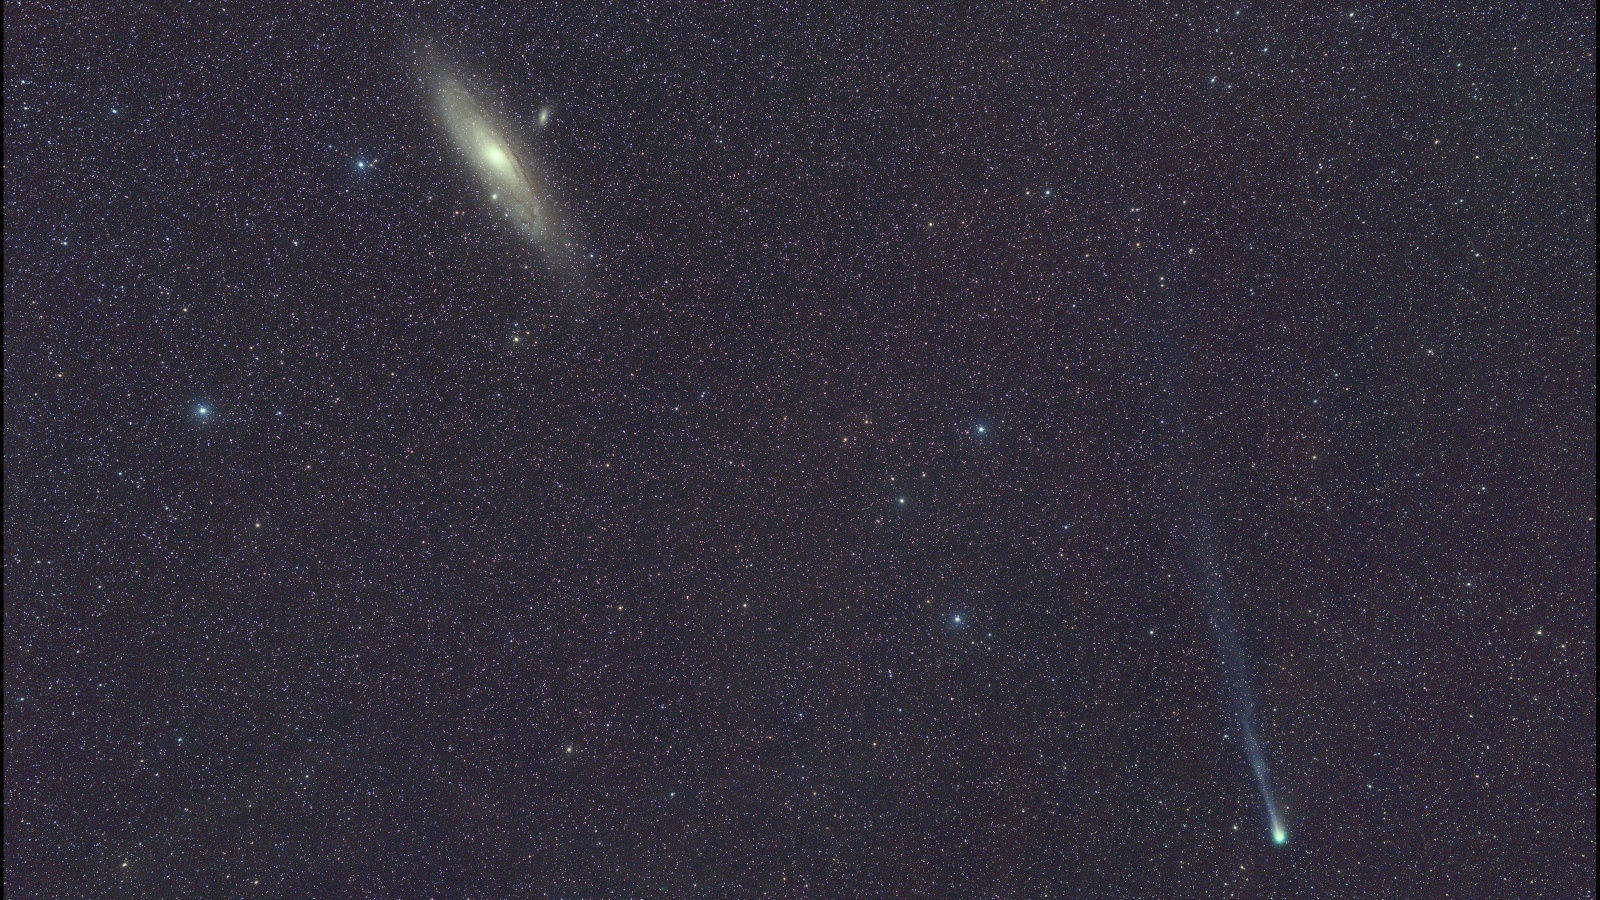 The Andromeda agalxy next to Comet 12p/Pons-Brooks